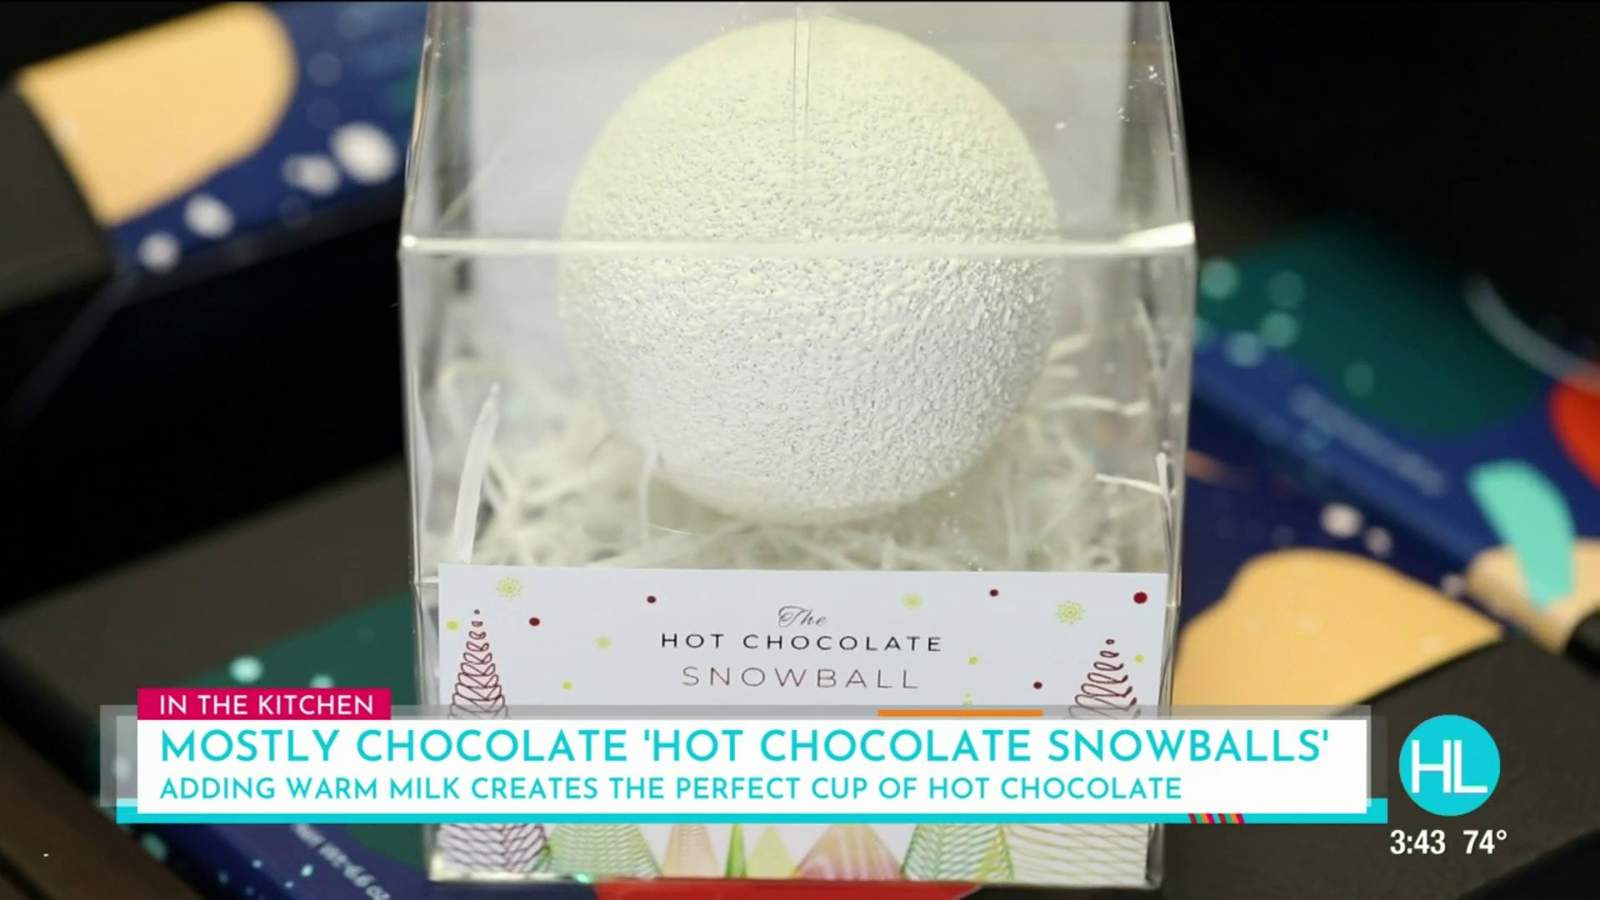 Watch how Mostly Chocolate Houston creates adorable Hot Chocolate “Snowballs”